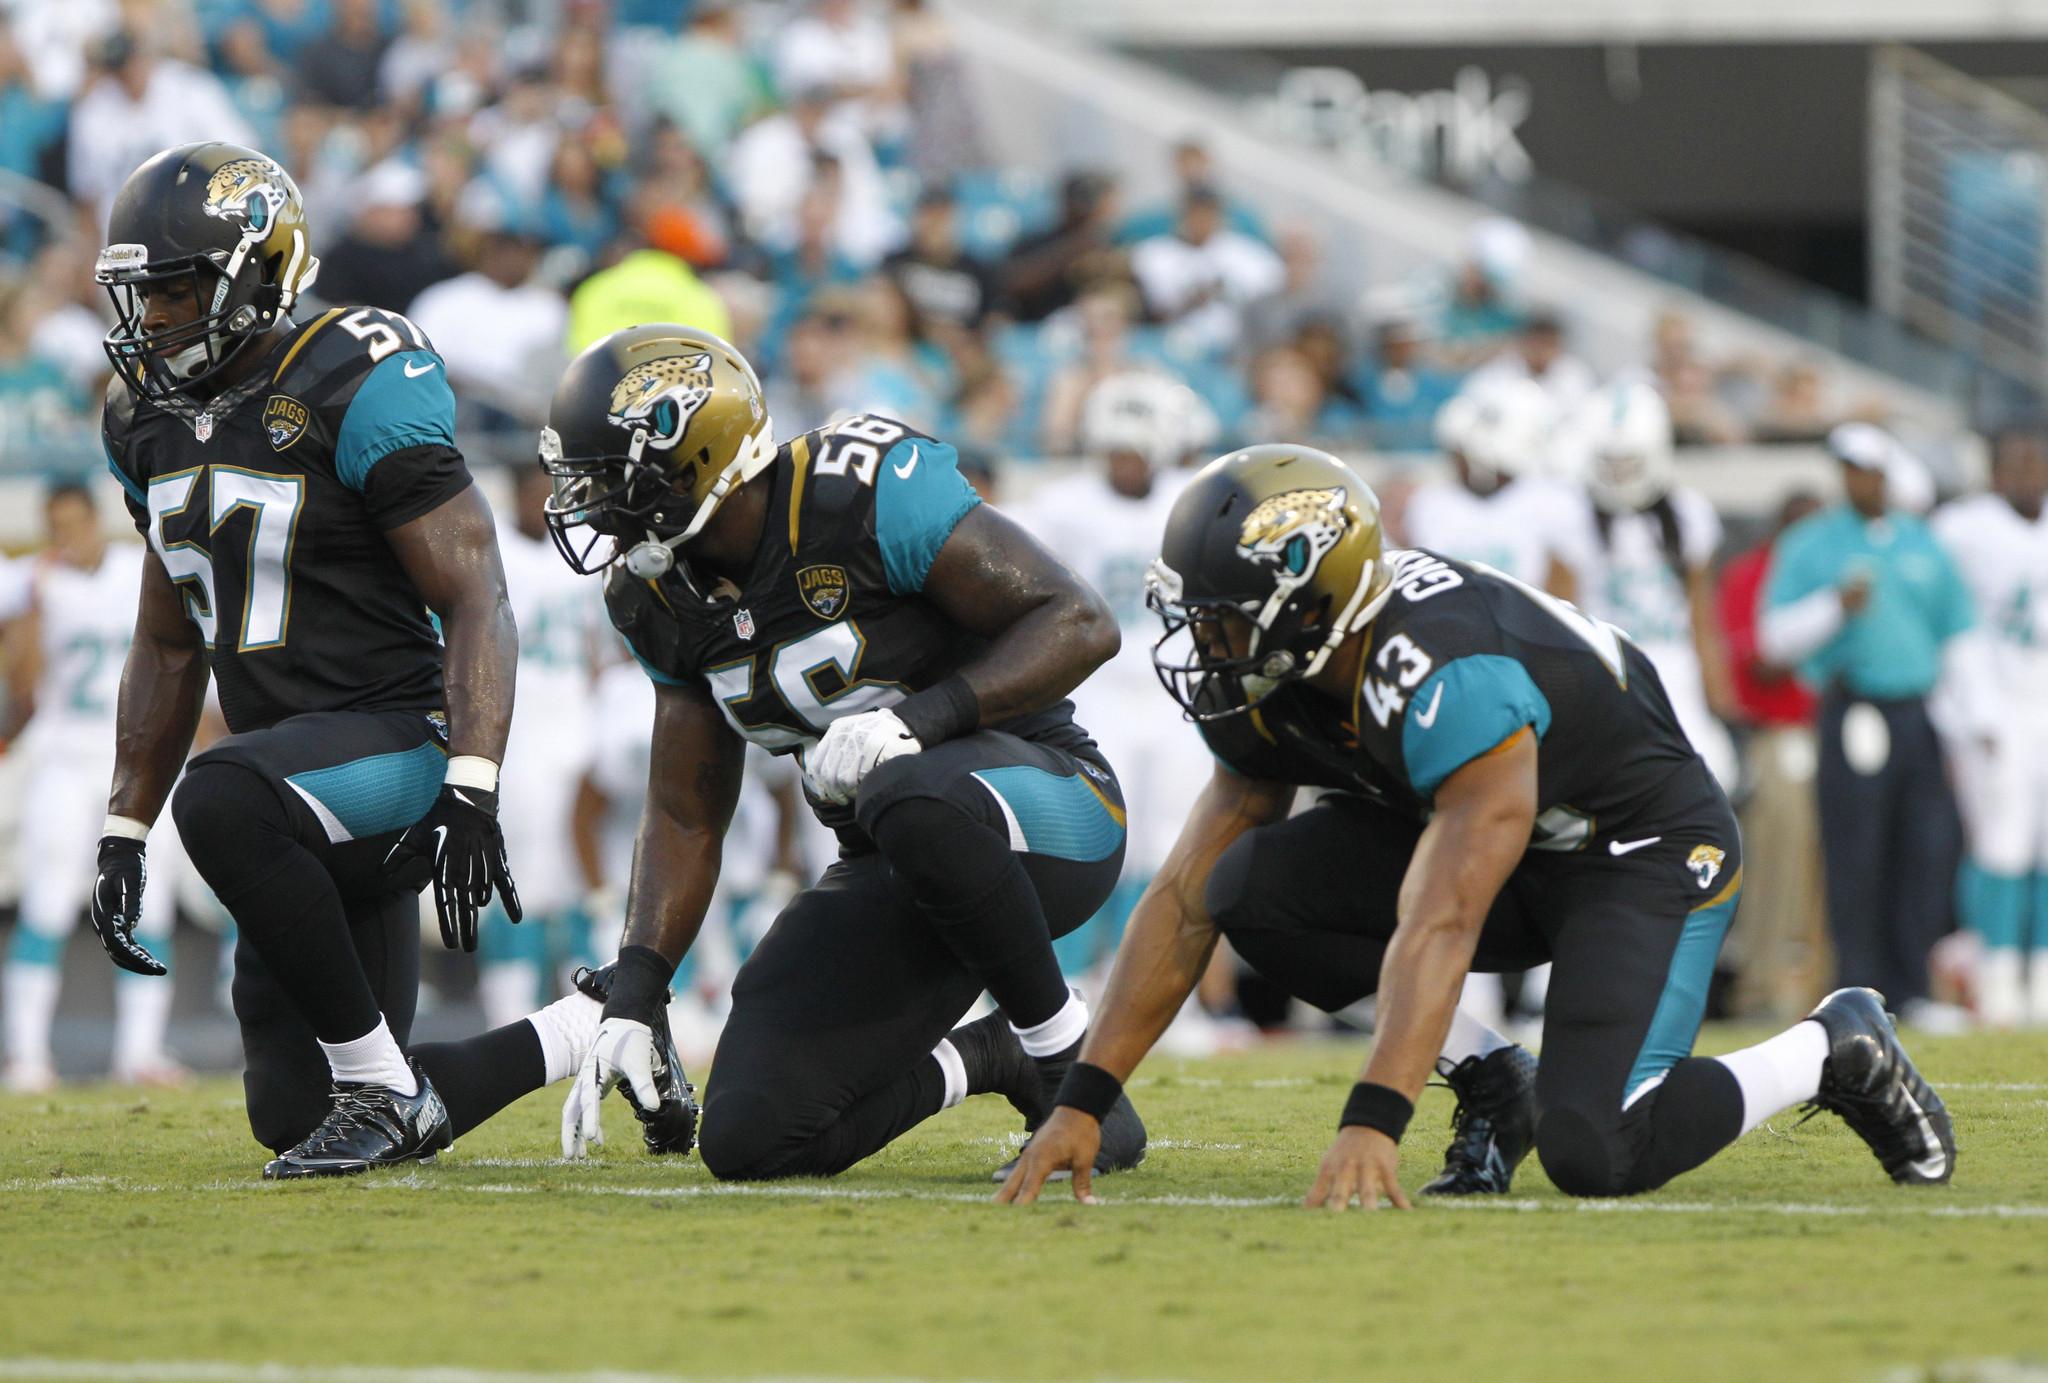 Jacksonville Jaguars Articles, Photos, and Videos - The Morning Call